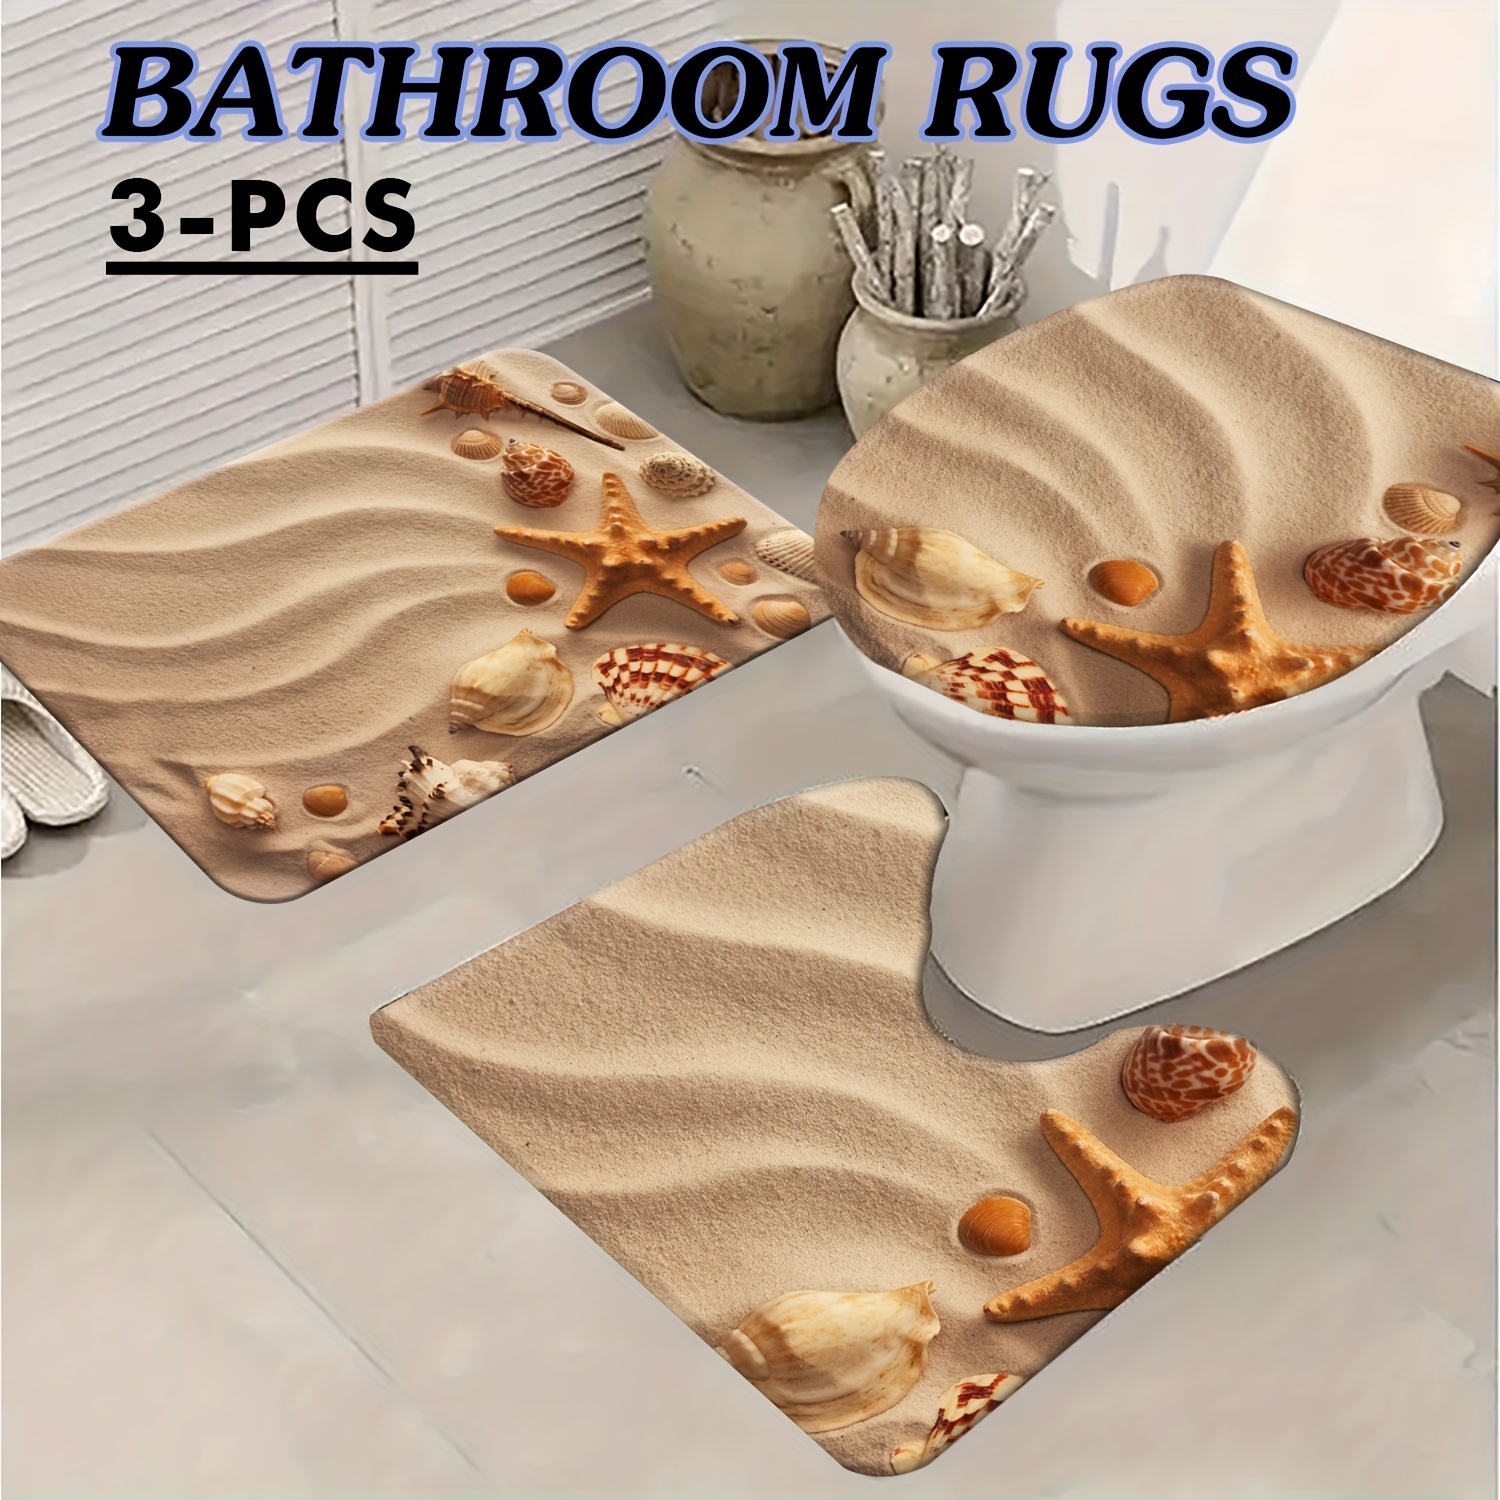 

3-piece Ocean Coastal Starfish Beach Rug Set - Bath Mat, Toilet Seat Cushion, And U-shaped Mat - Machine Washable, Low Pile, And Made Of Polyester